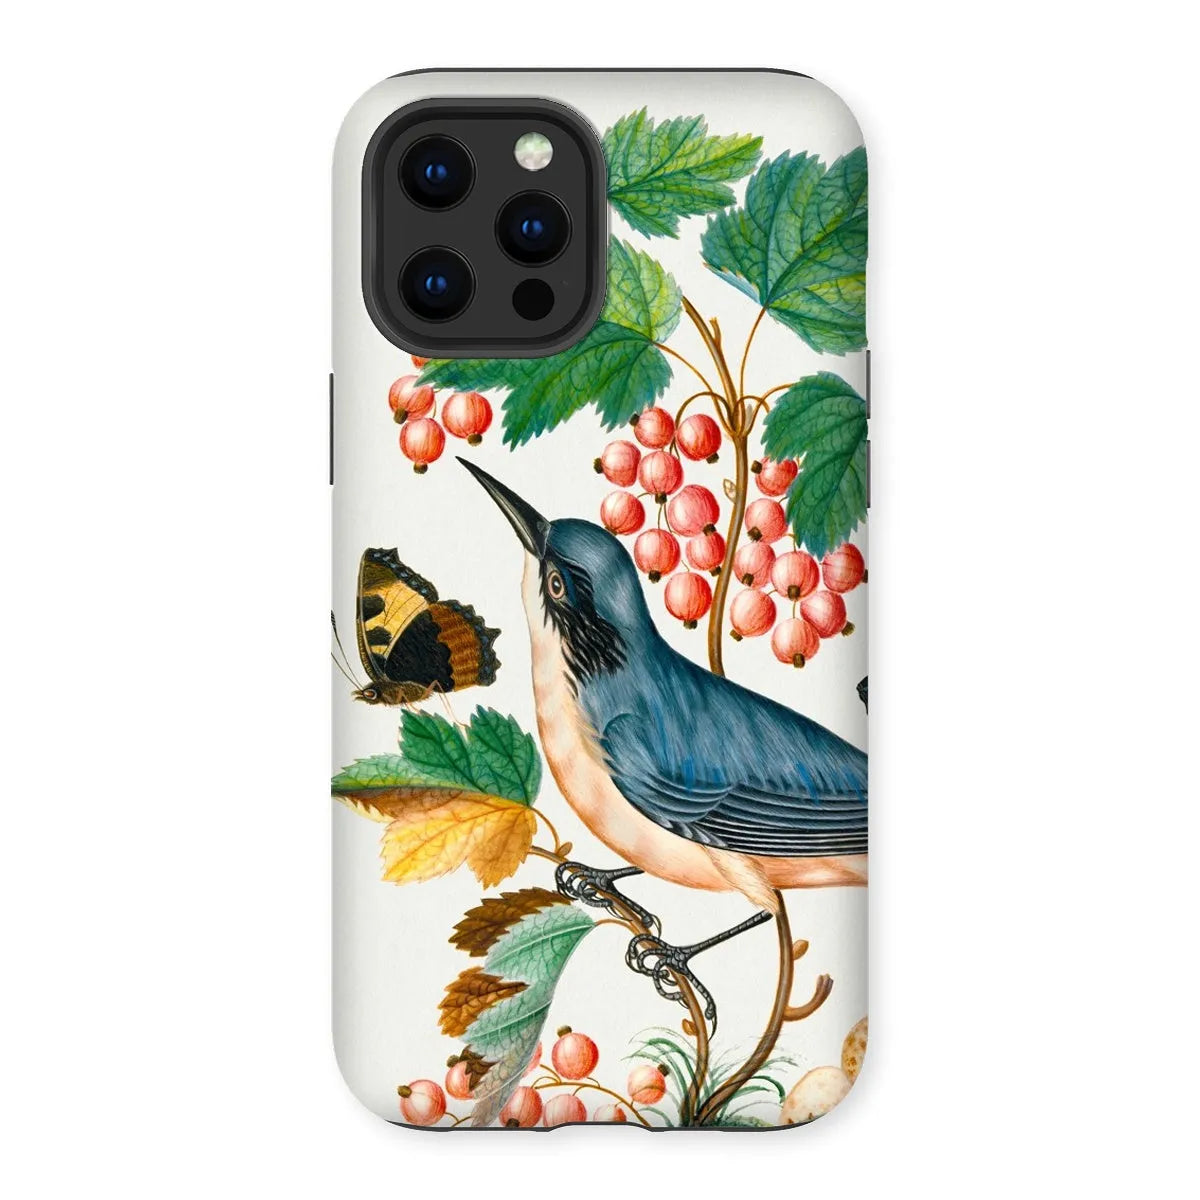 Warbler Admiral Wasps & Ants - Art Phone Case - James Bolton - Iphone 12 Pro Max / Matte - Mobile Phone Cases